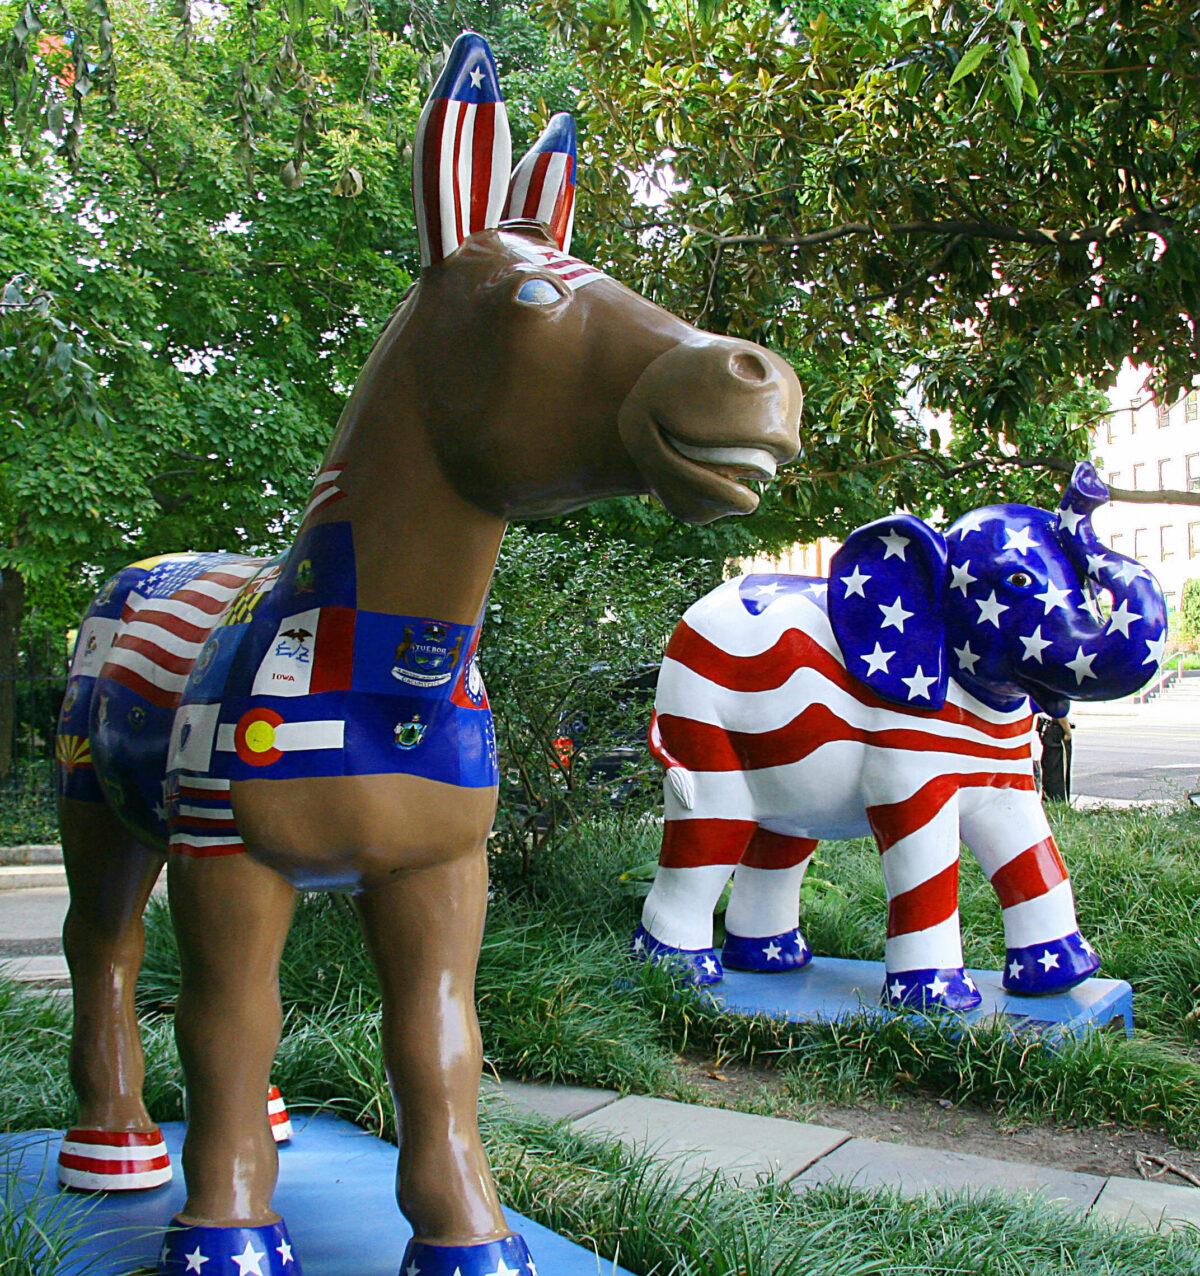 The symbols of the Democratic (donkey) and Republican (elephant) parties are seen on display in Washington on Aug. 25, 2008. (Karen Bleier/AFP via Getty Images)